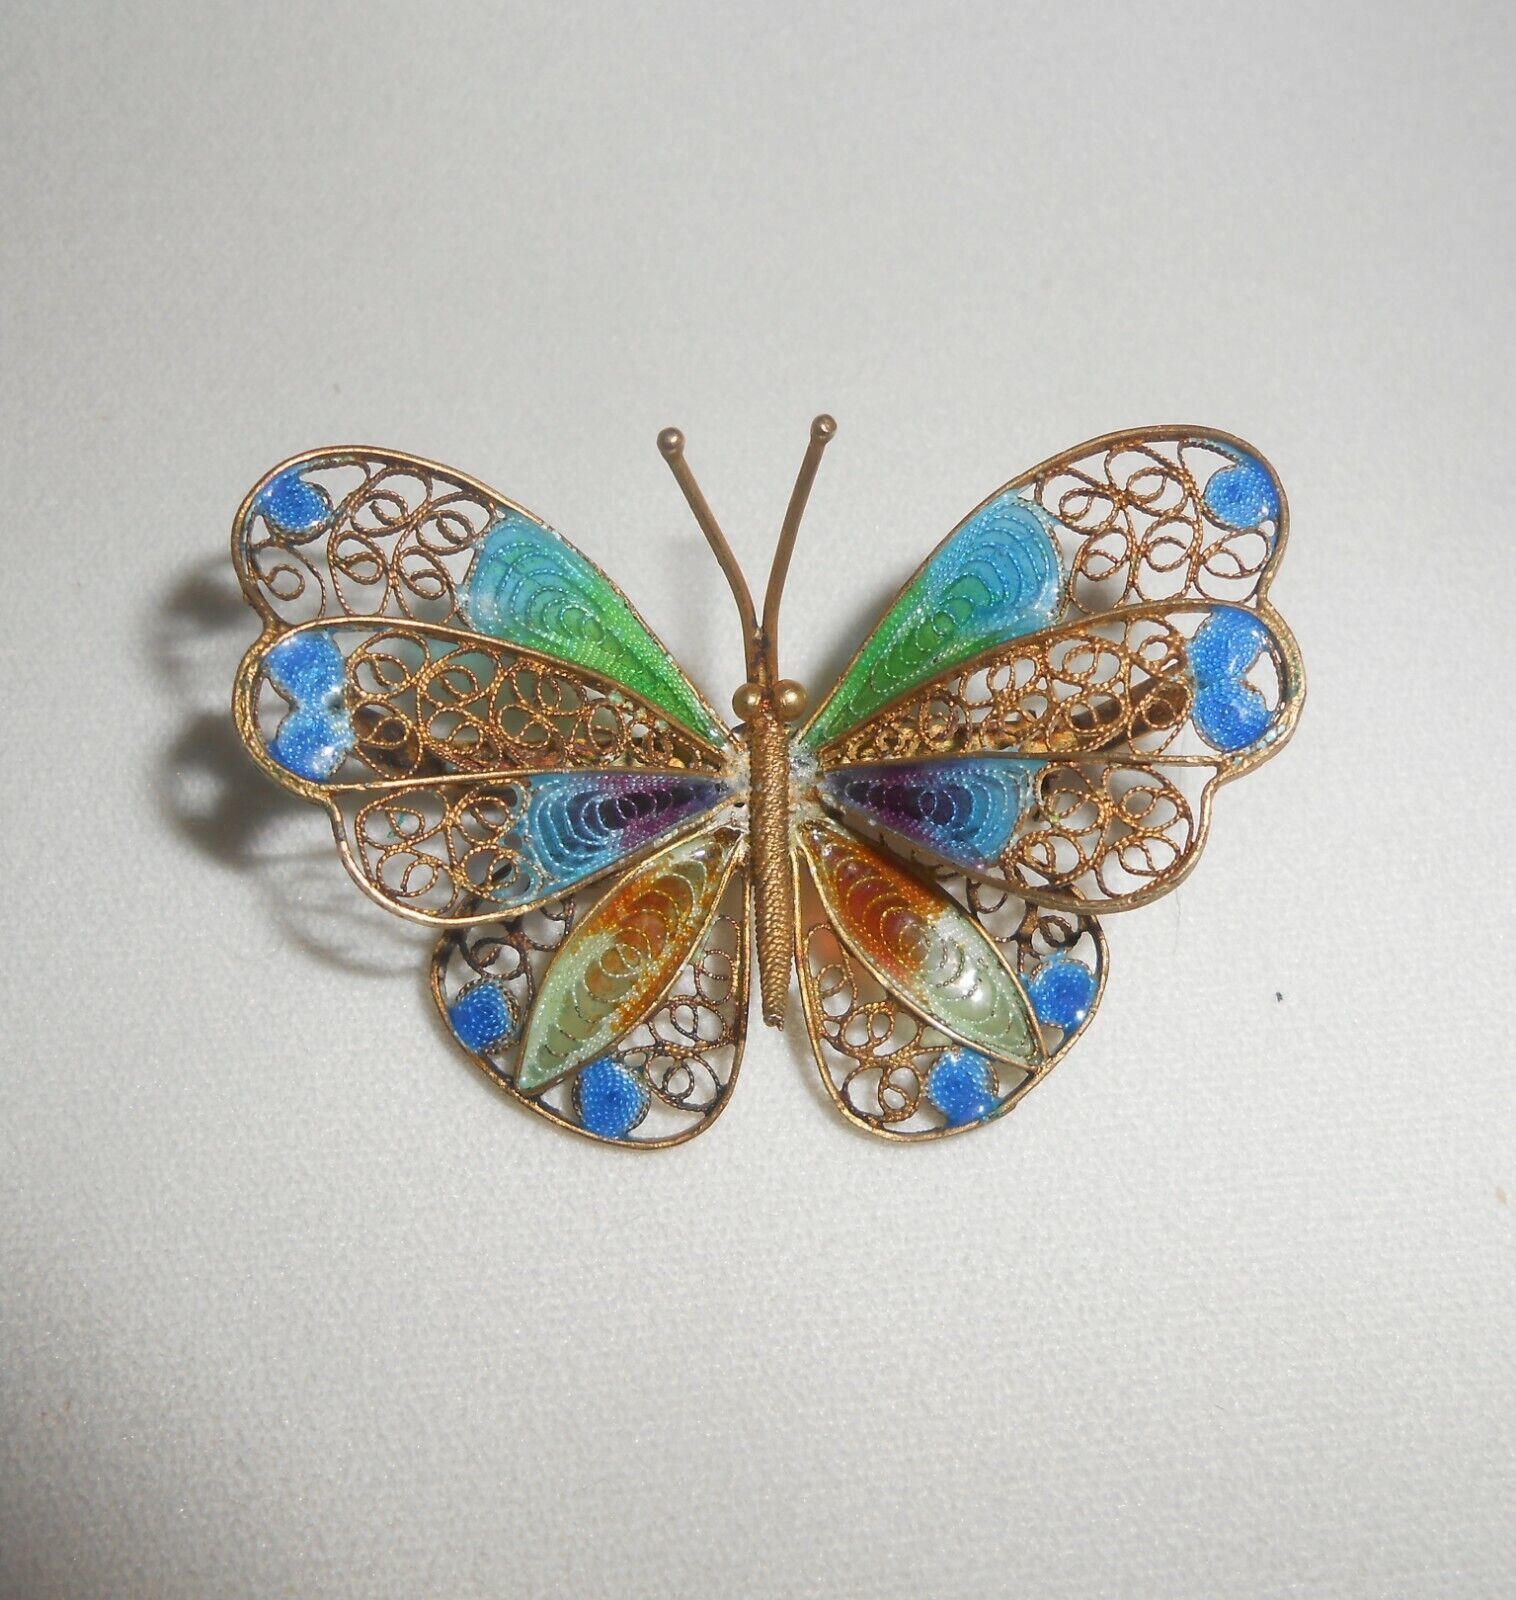 Primary image for Vintage Butterfly Brooch Pin Chinese Export 800 Silver Filigree Plique-a-jour